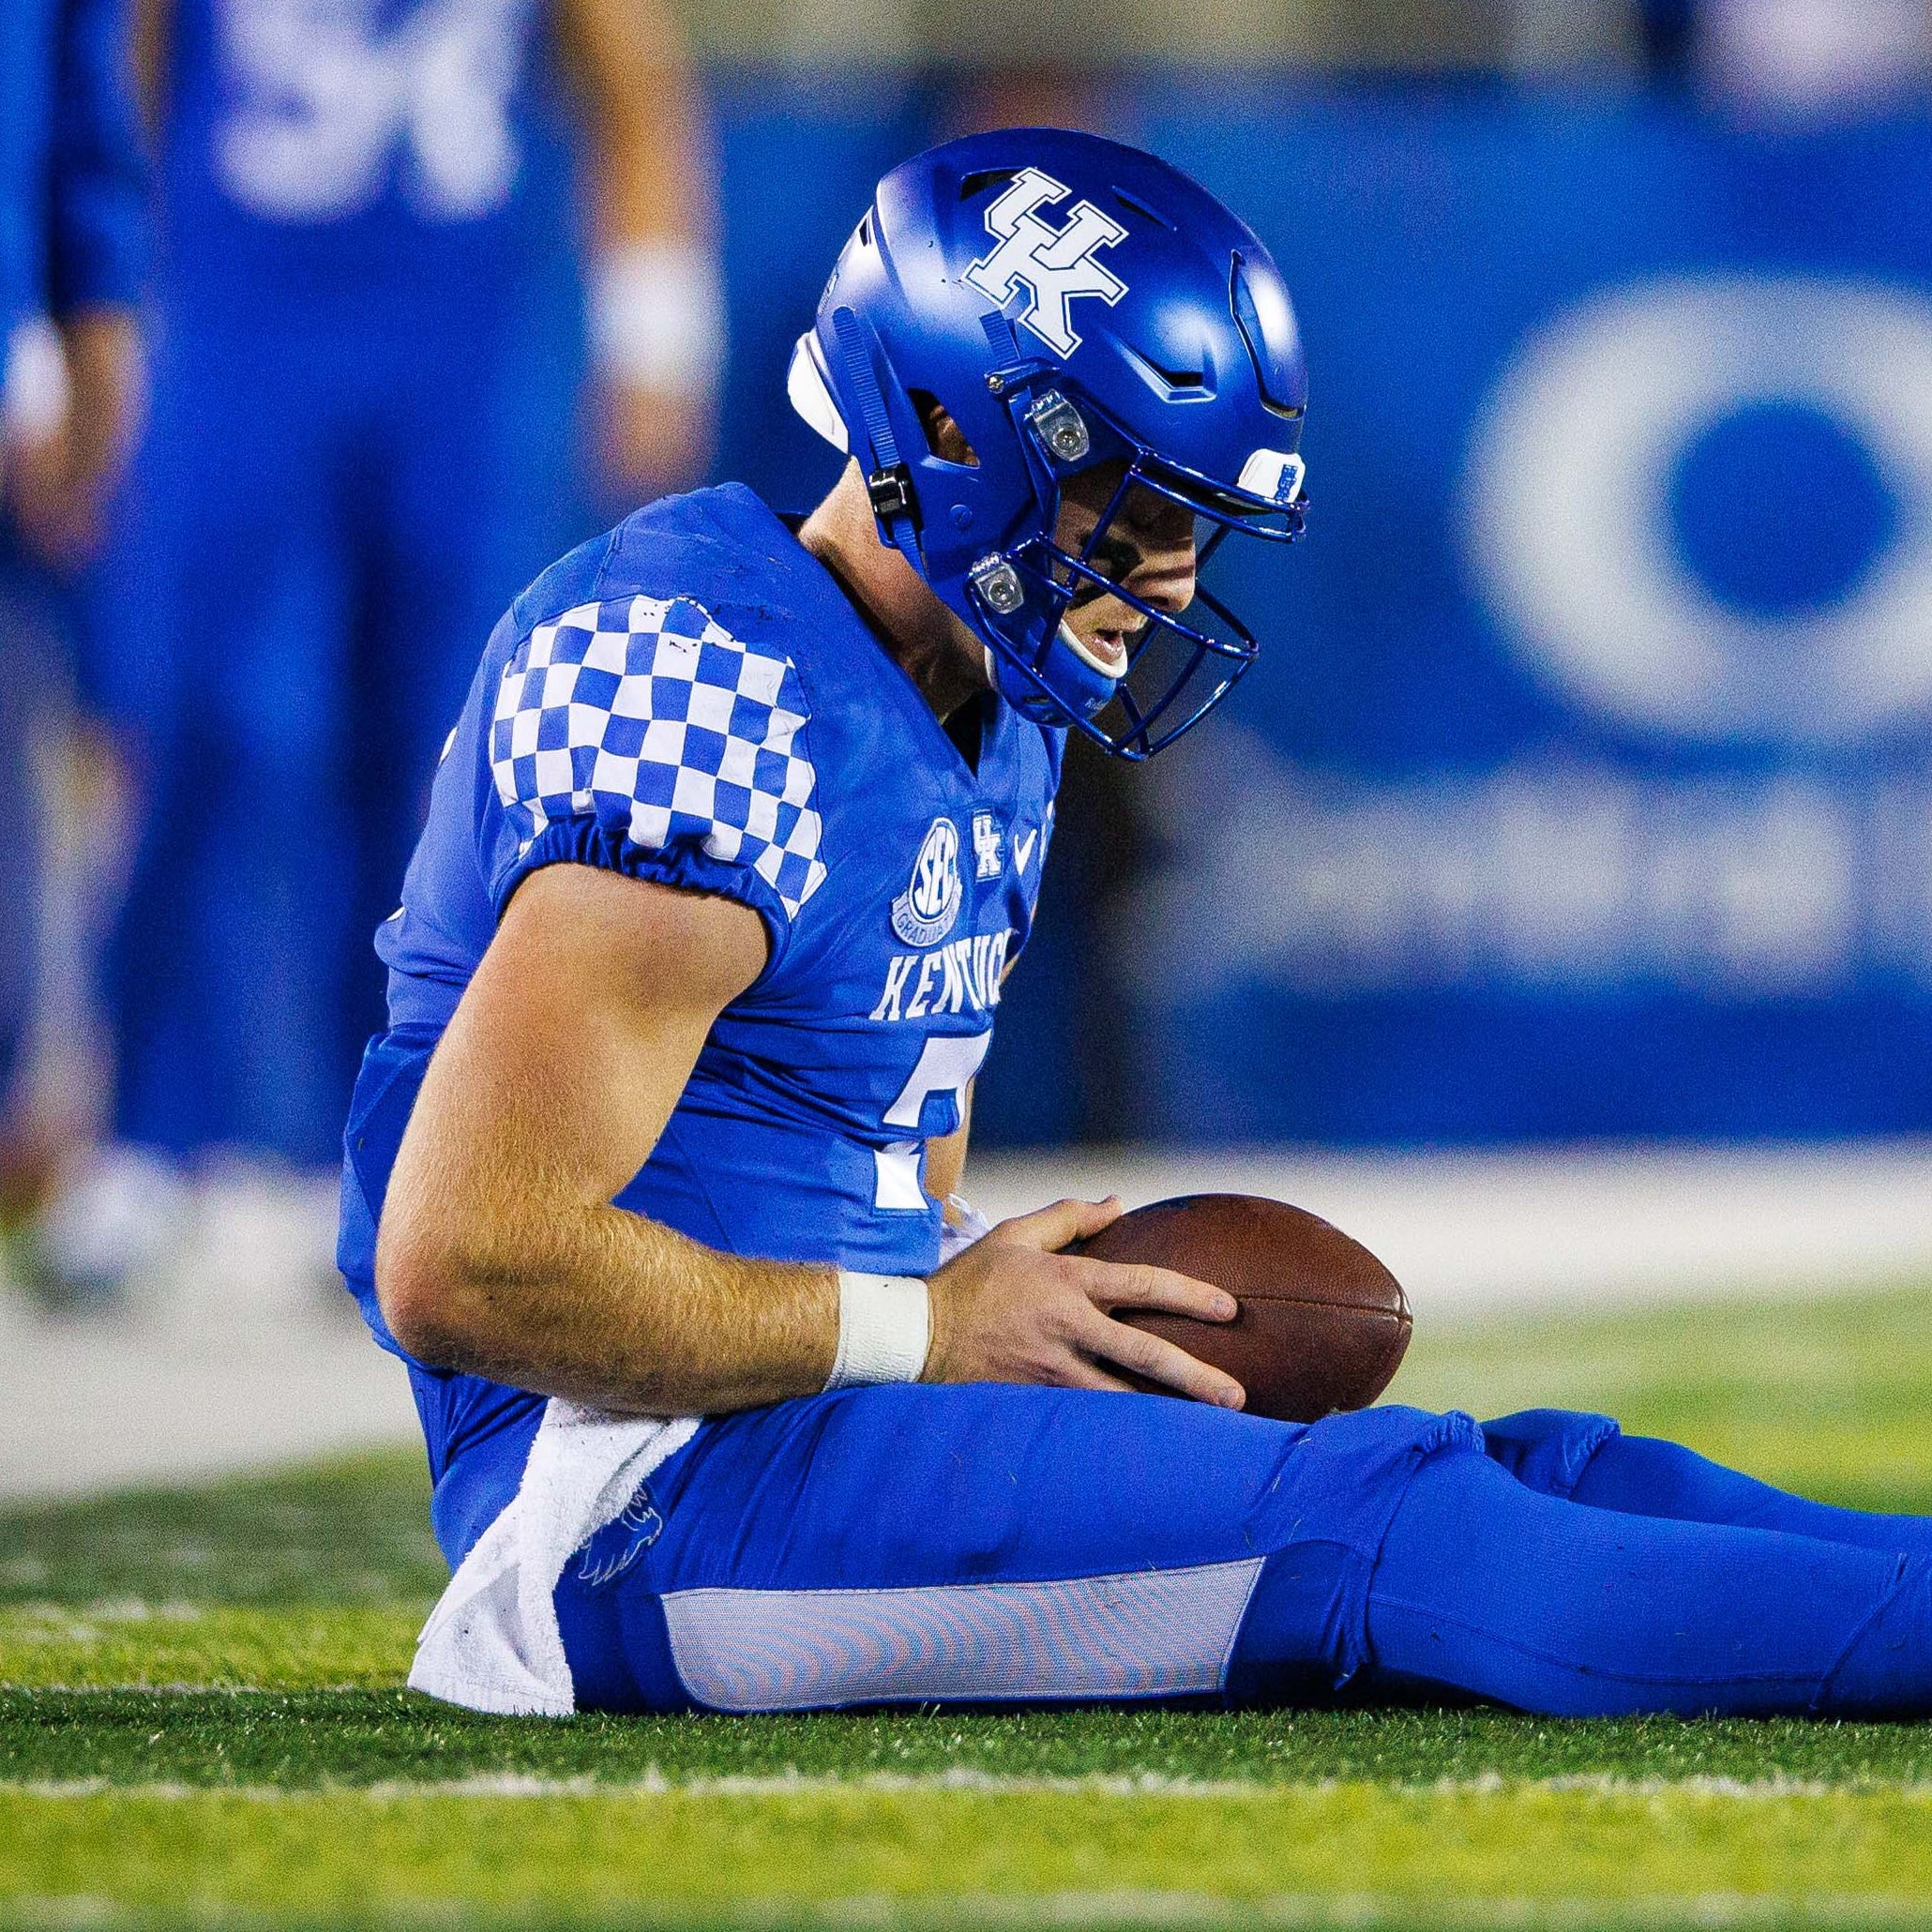 Kentucky Wildcats quarterback Will Levis (7) during the first quarter against the Mississippi State Bulldogs at Kroger Field.